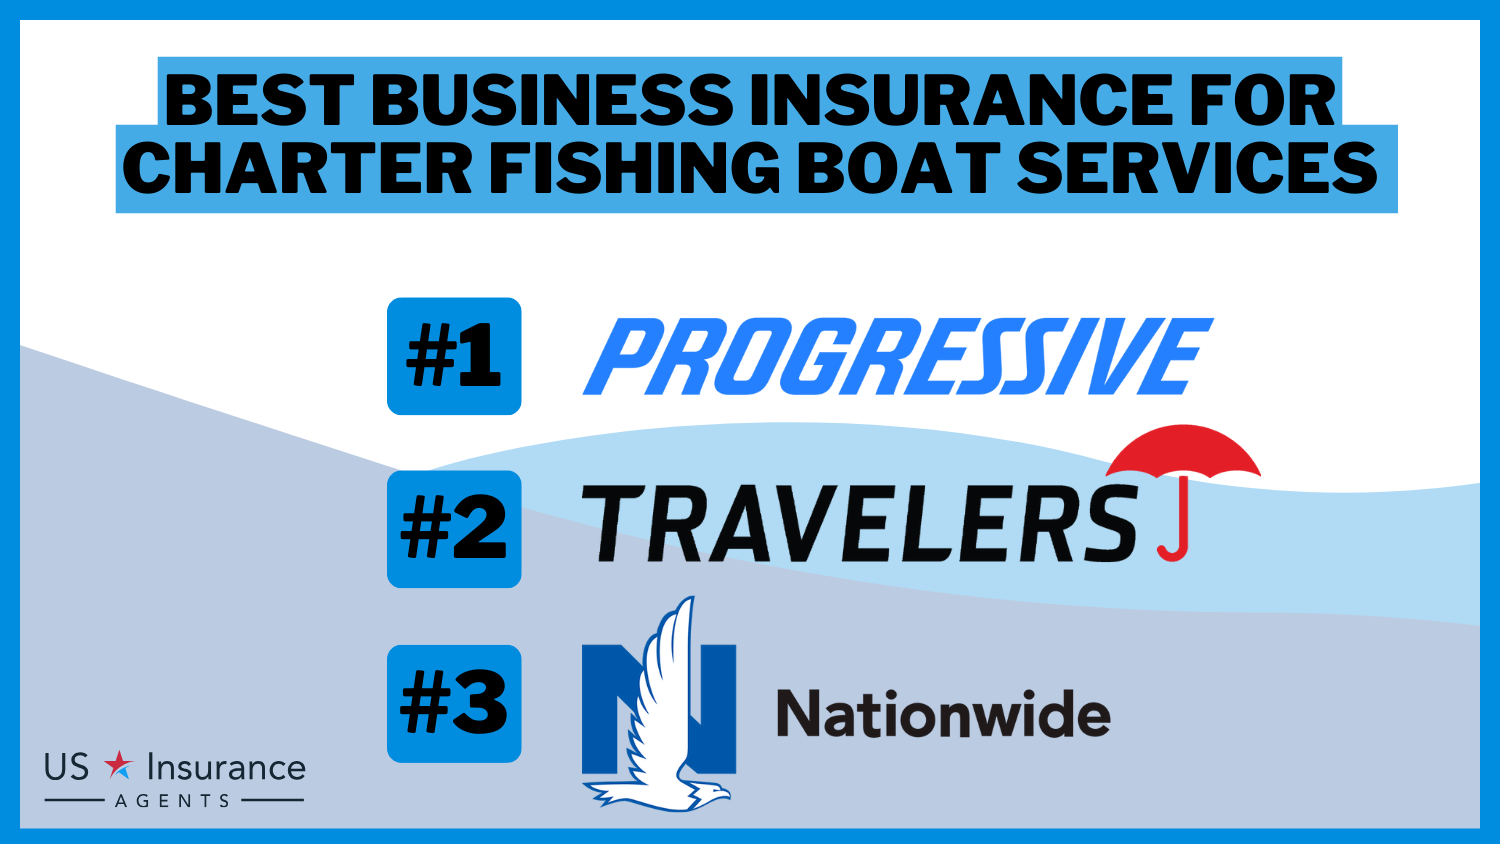 Progressive, Travelers, Nationwide: Best Business Insurance for Charter Fishing Boat Services